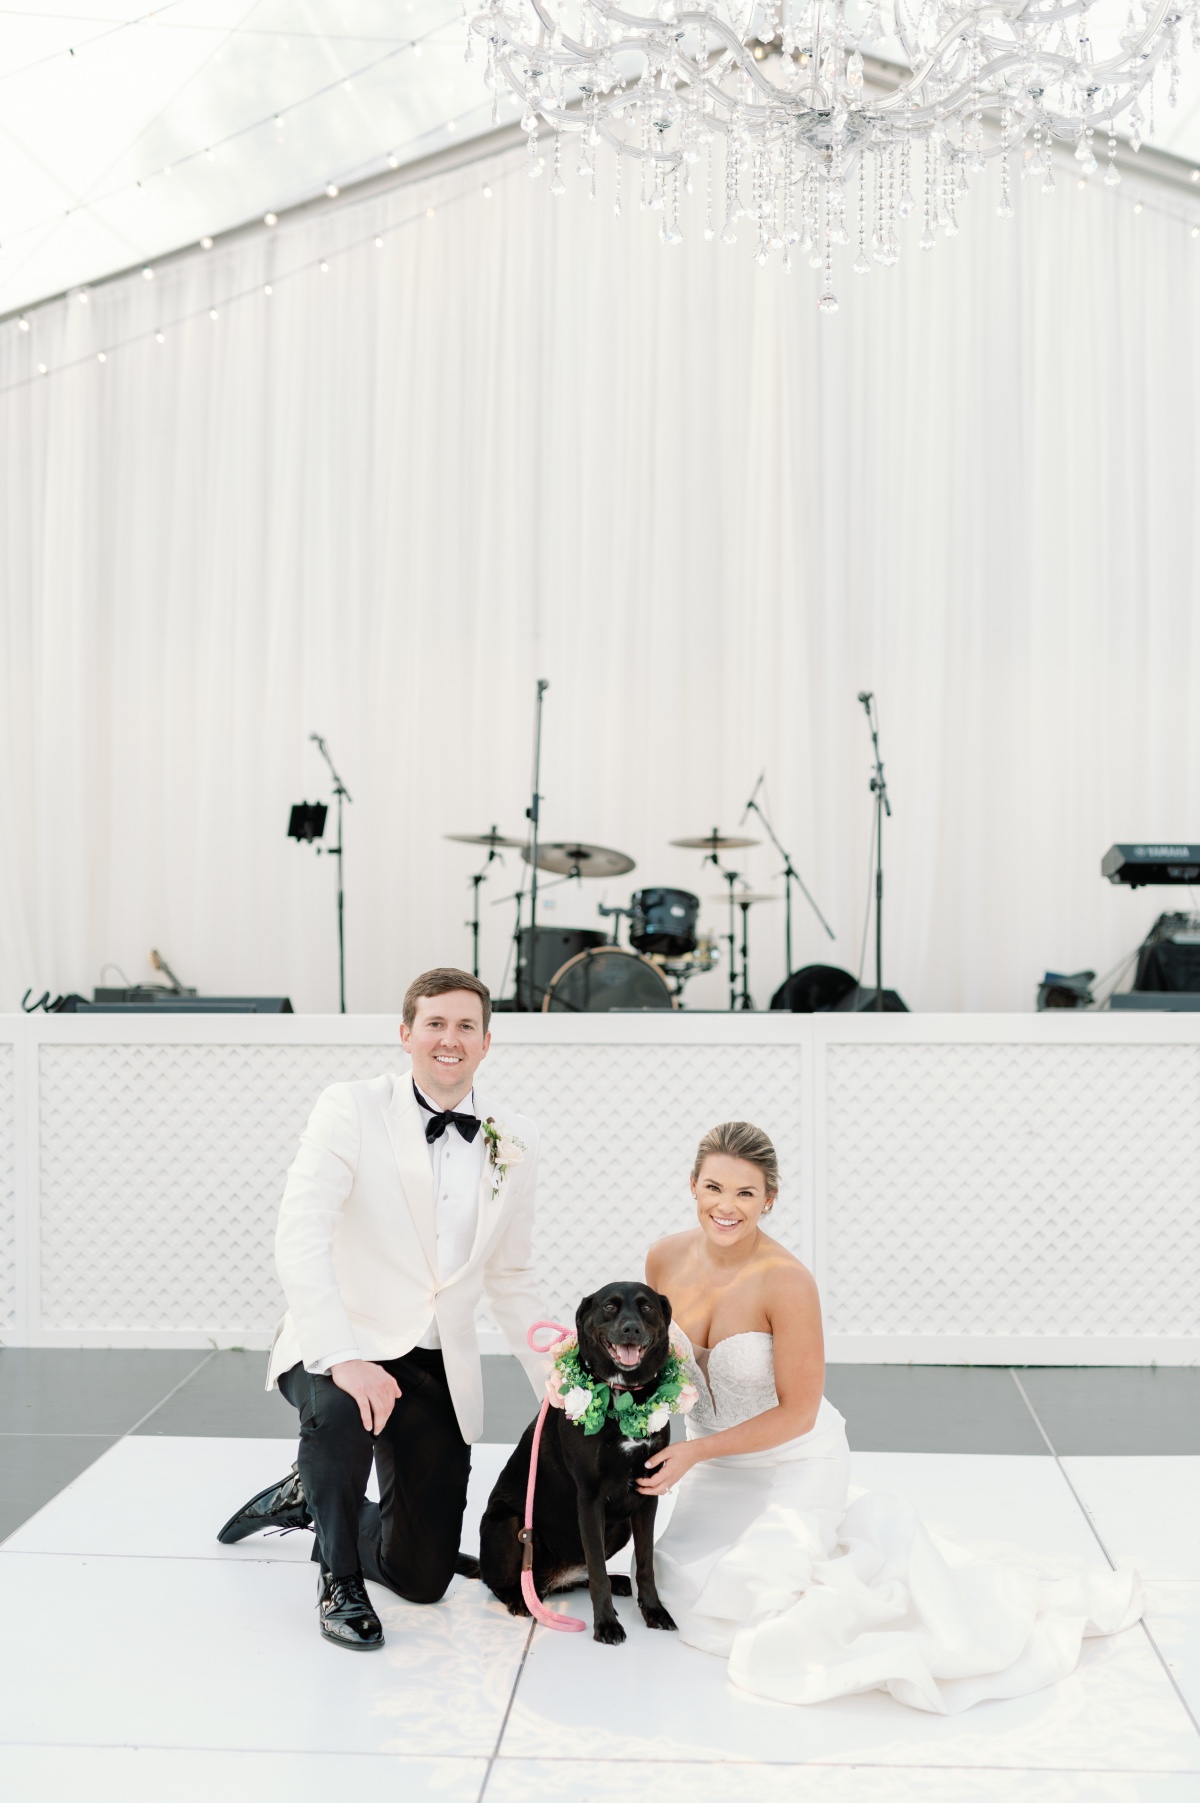 Couple with dog at dance floor 